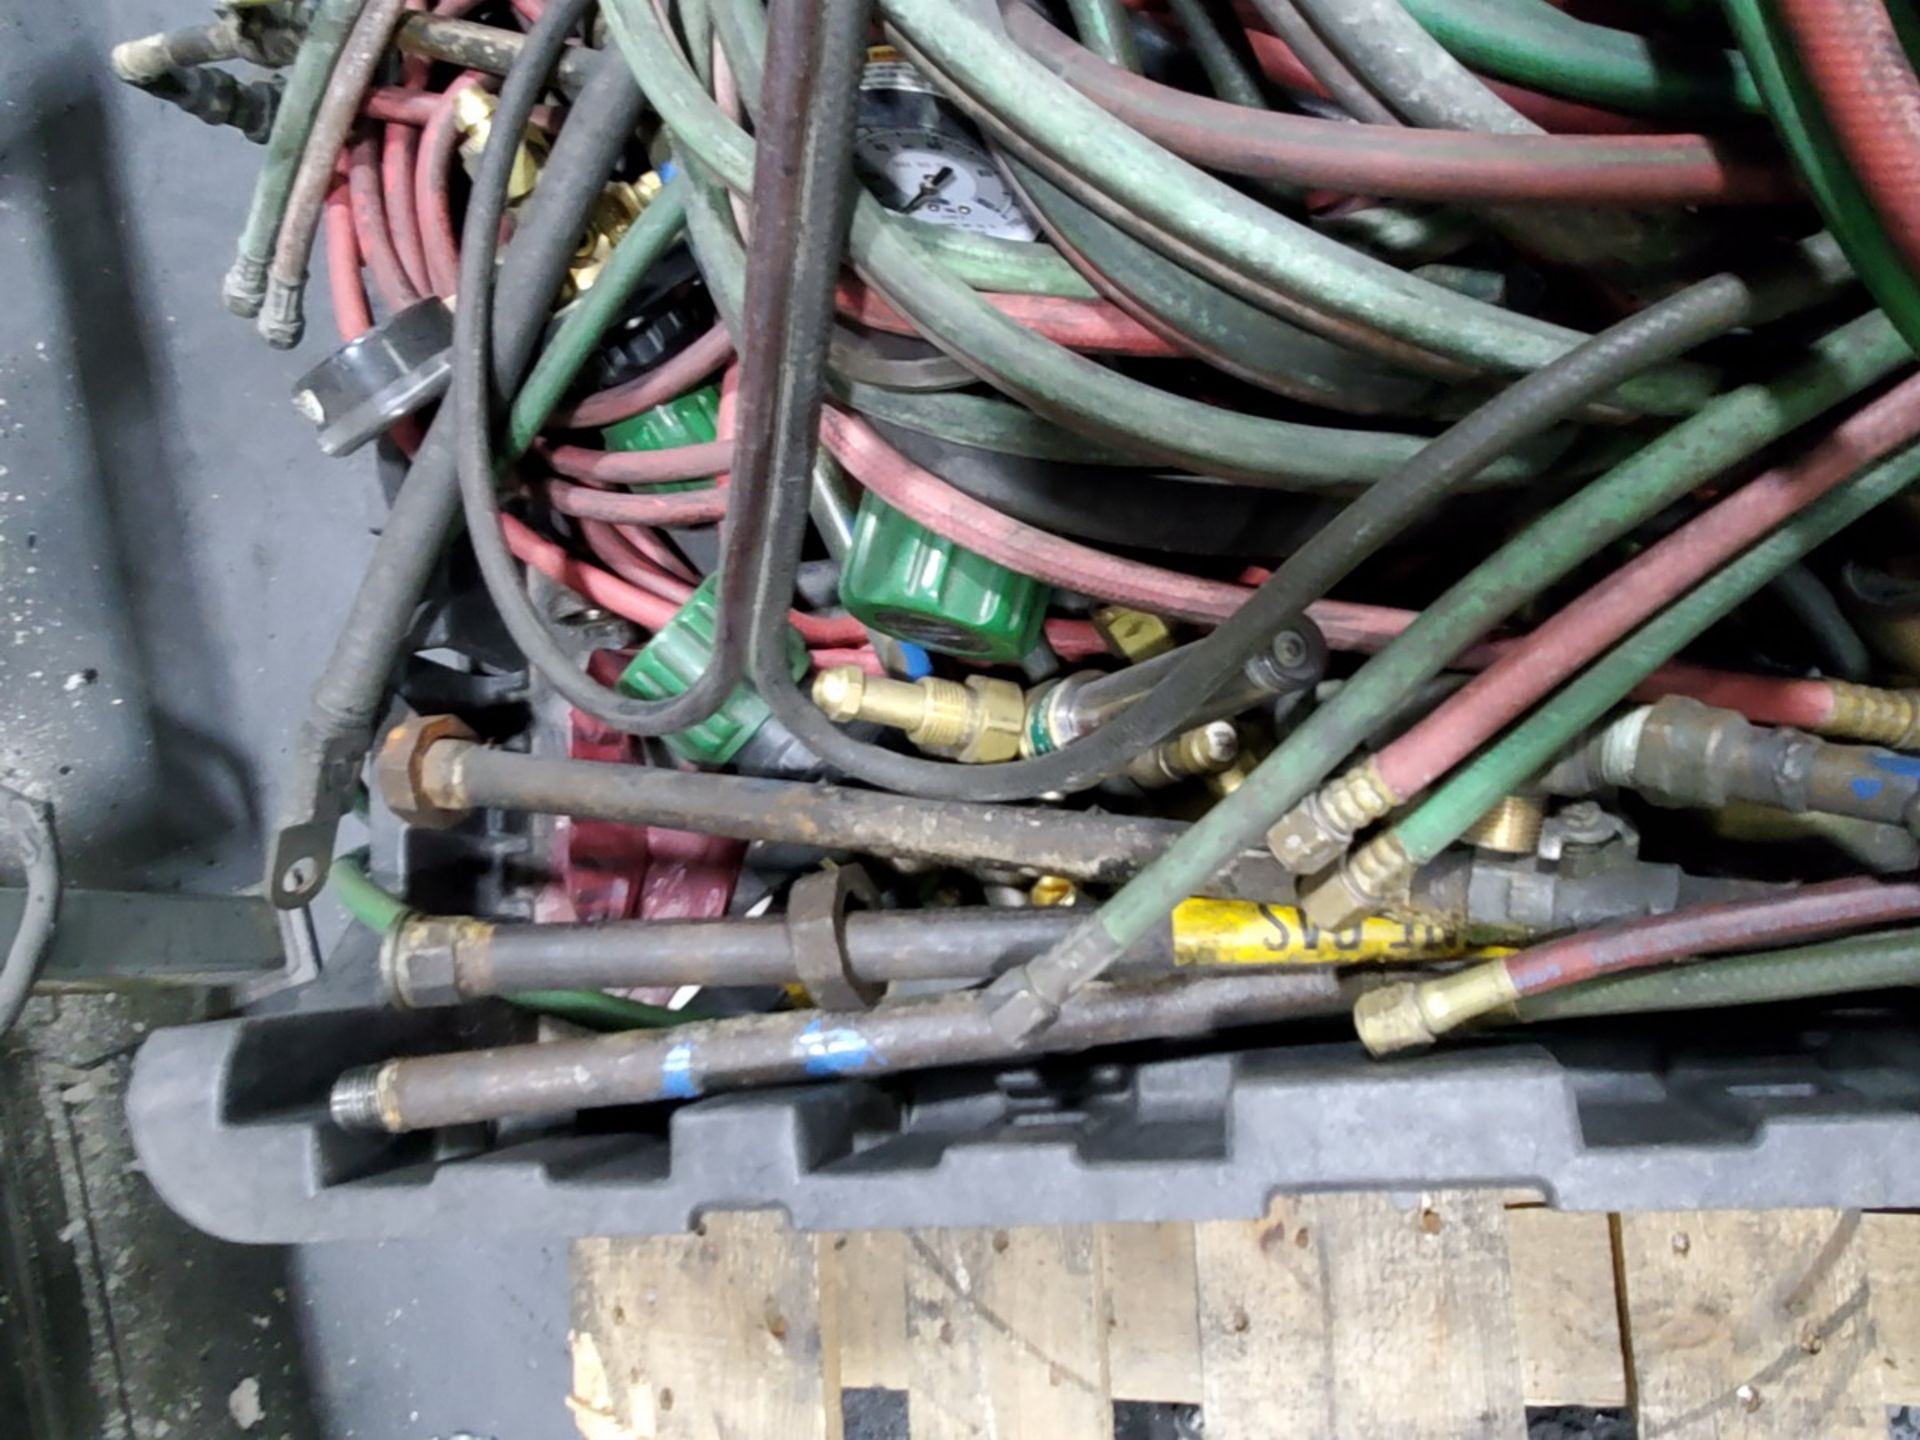 Welding Contents To Include But Not Limited To: Regulators, Leads, Hoses, etc. - Image 7 of 9